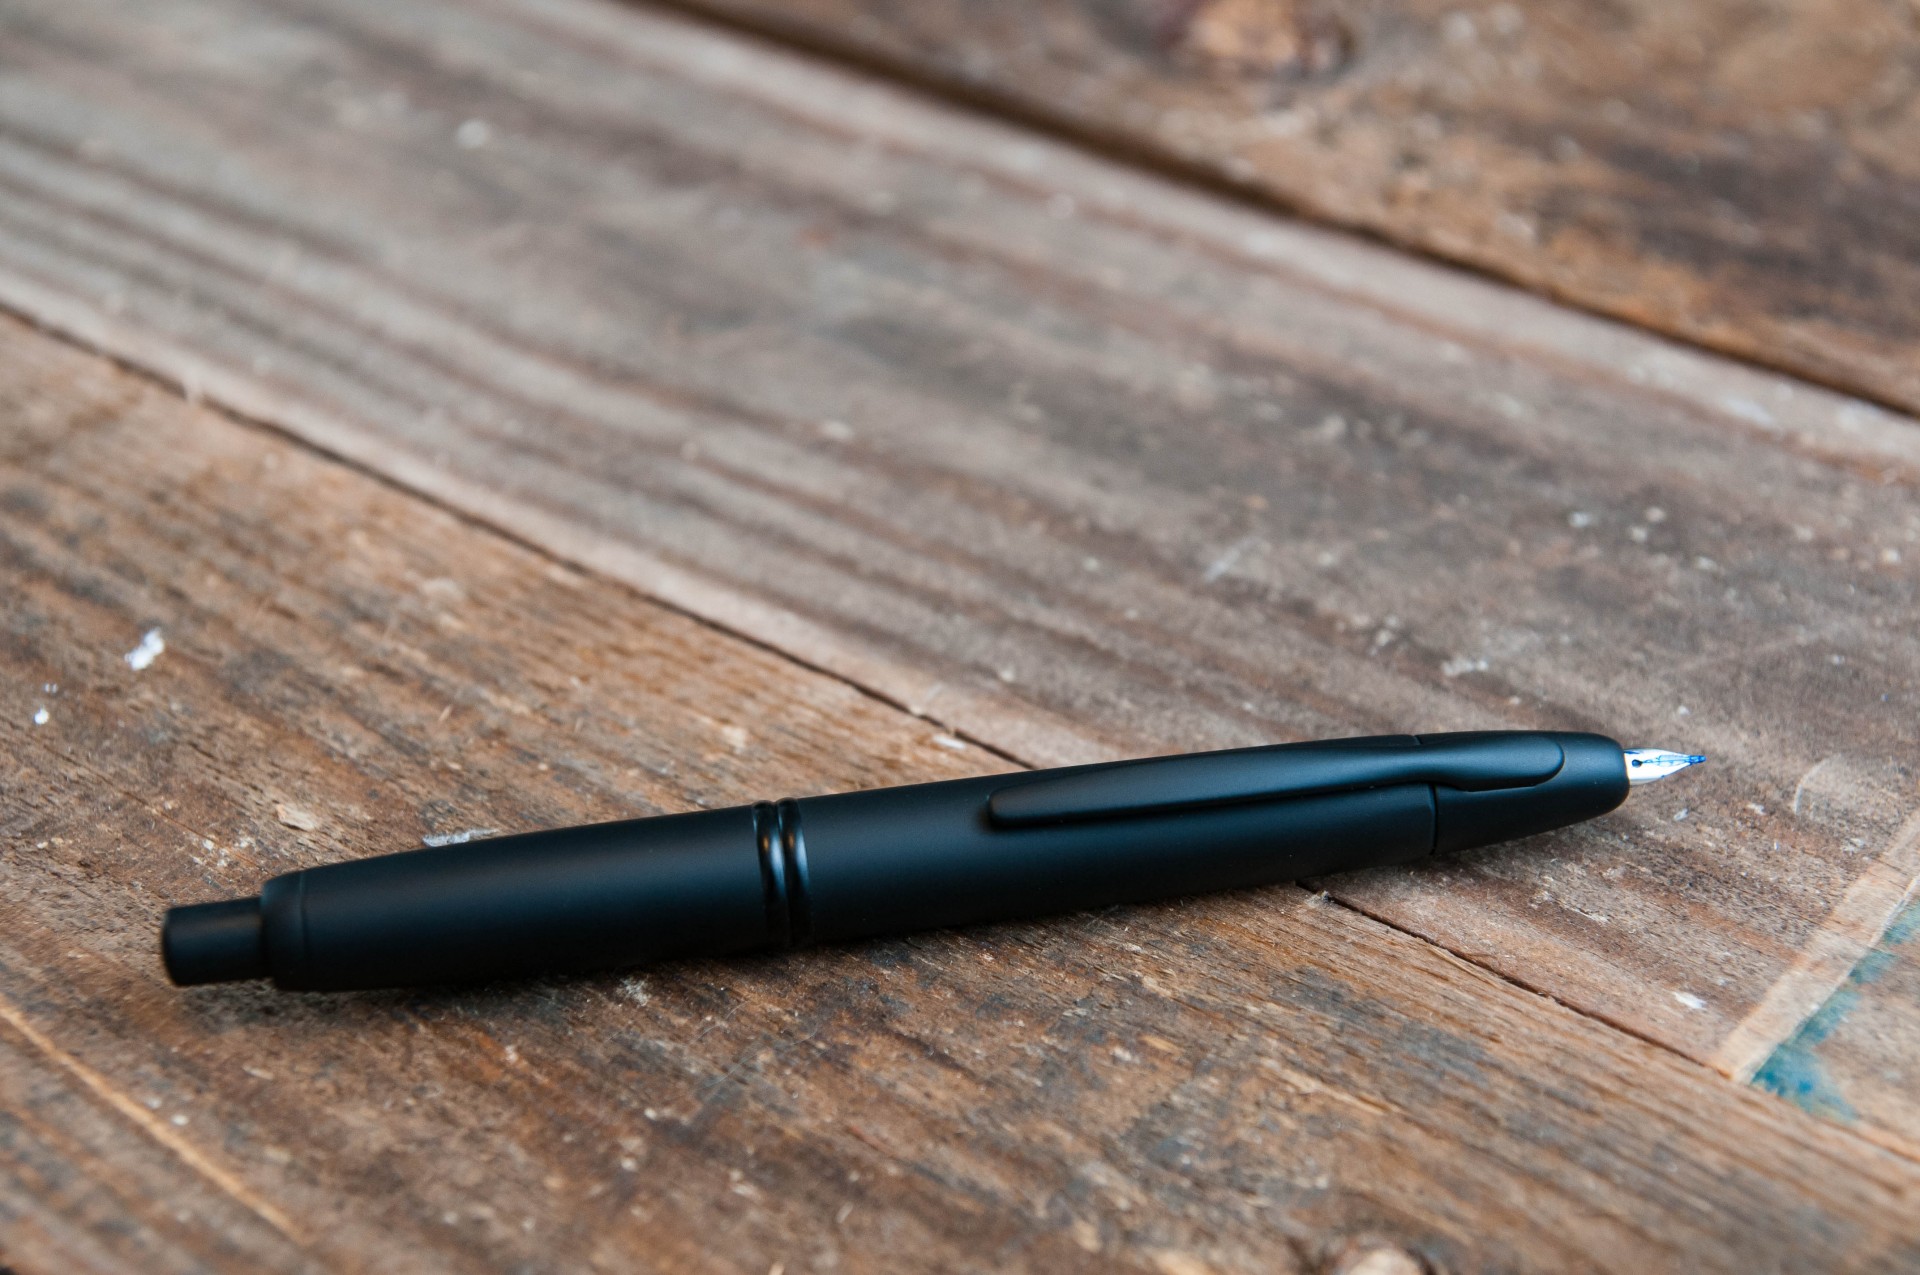 This is one of the few retractable-nib fountain pens on the market and it is extremely well done.